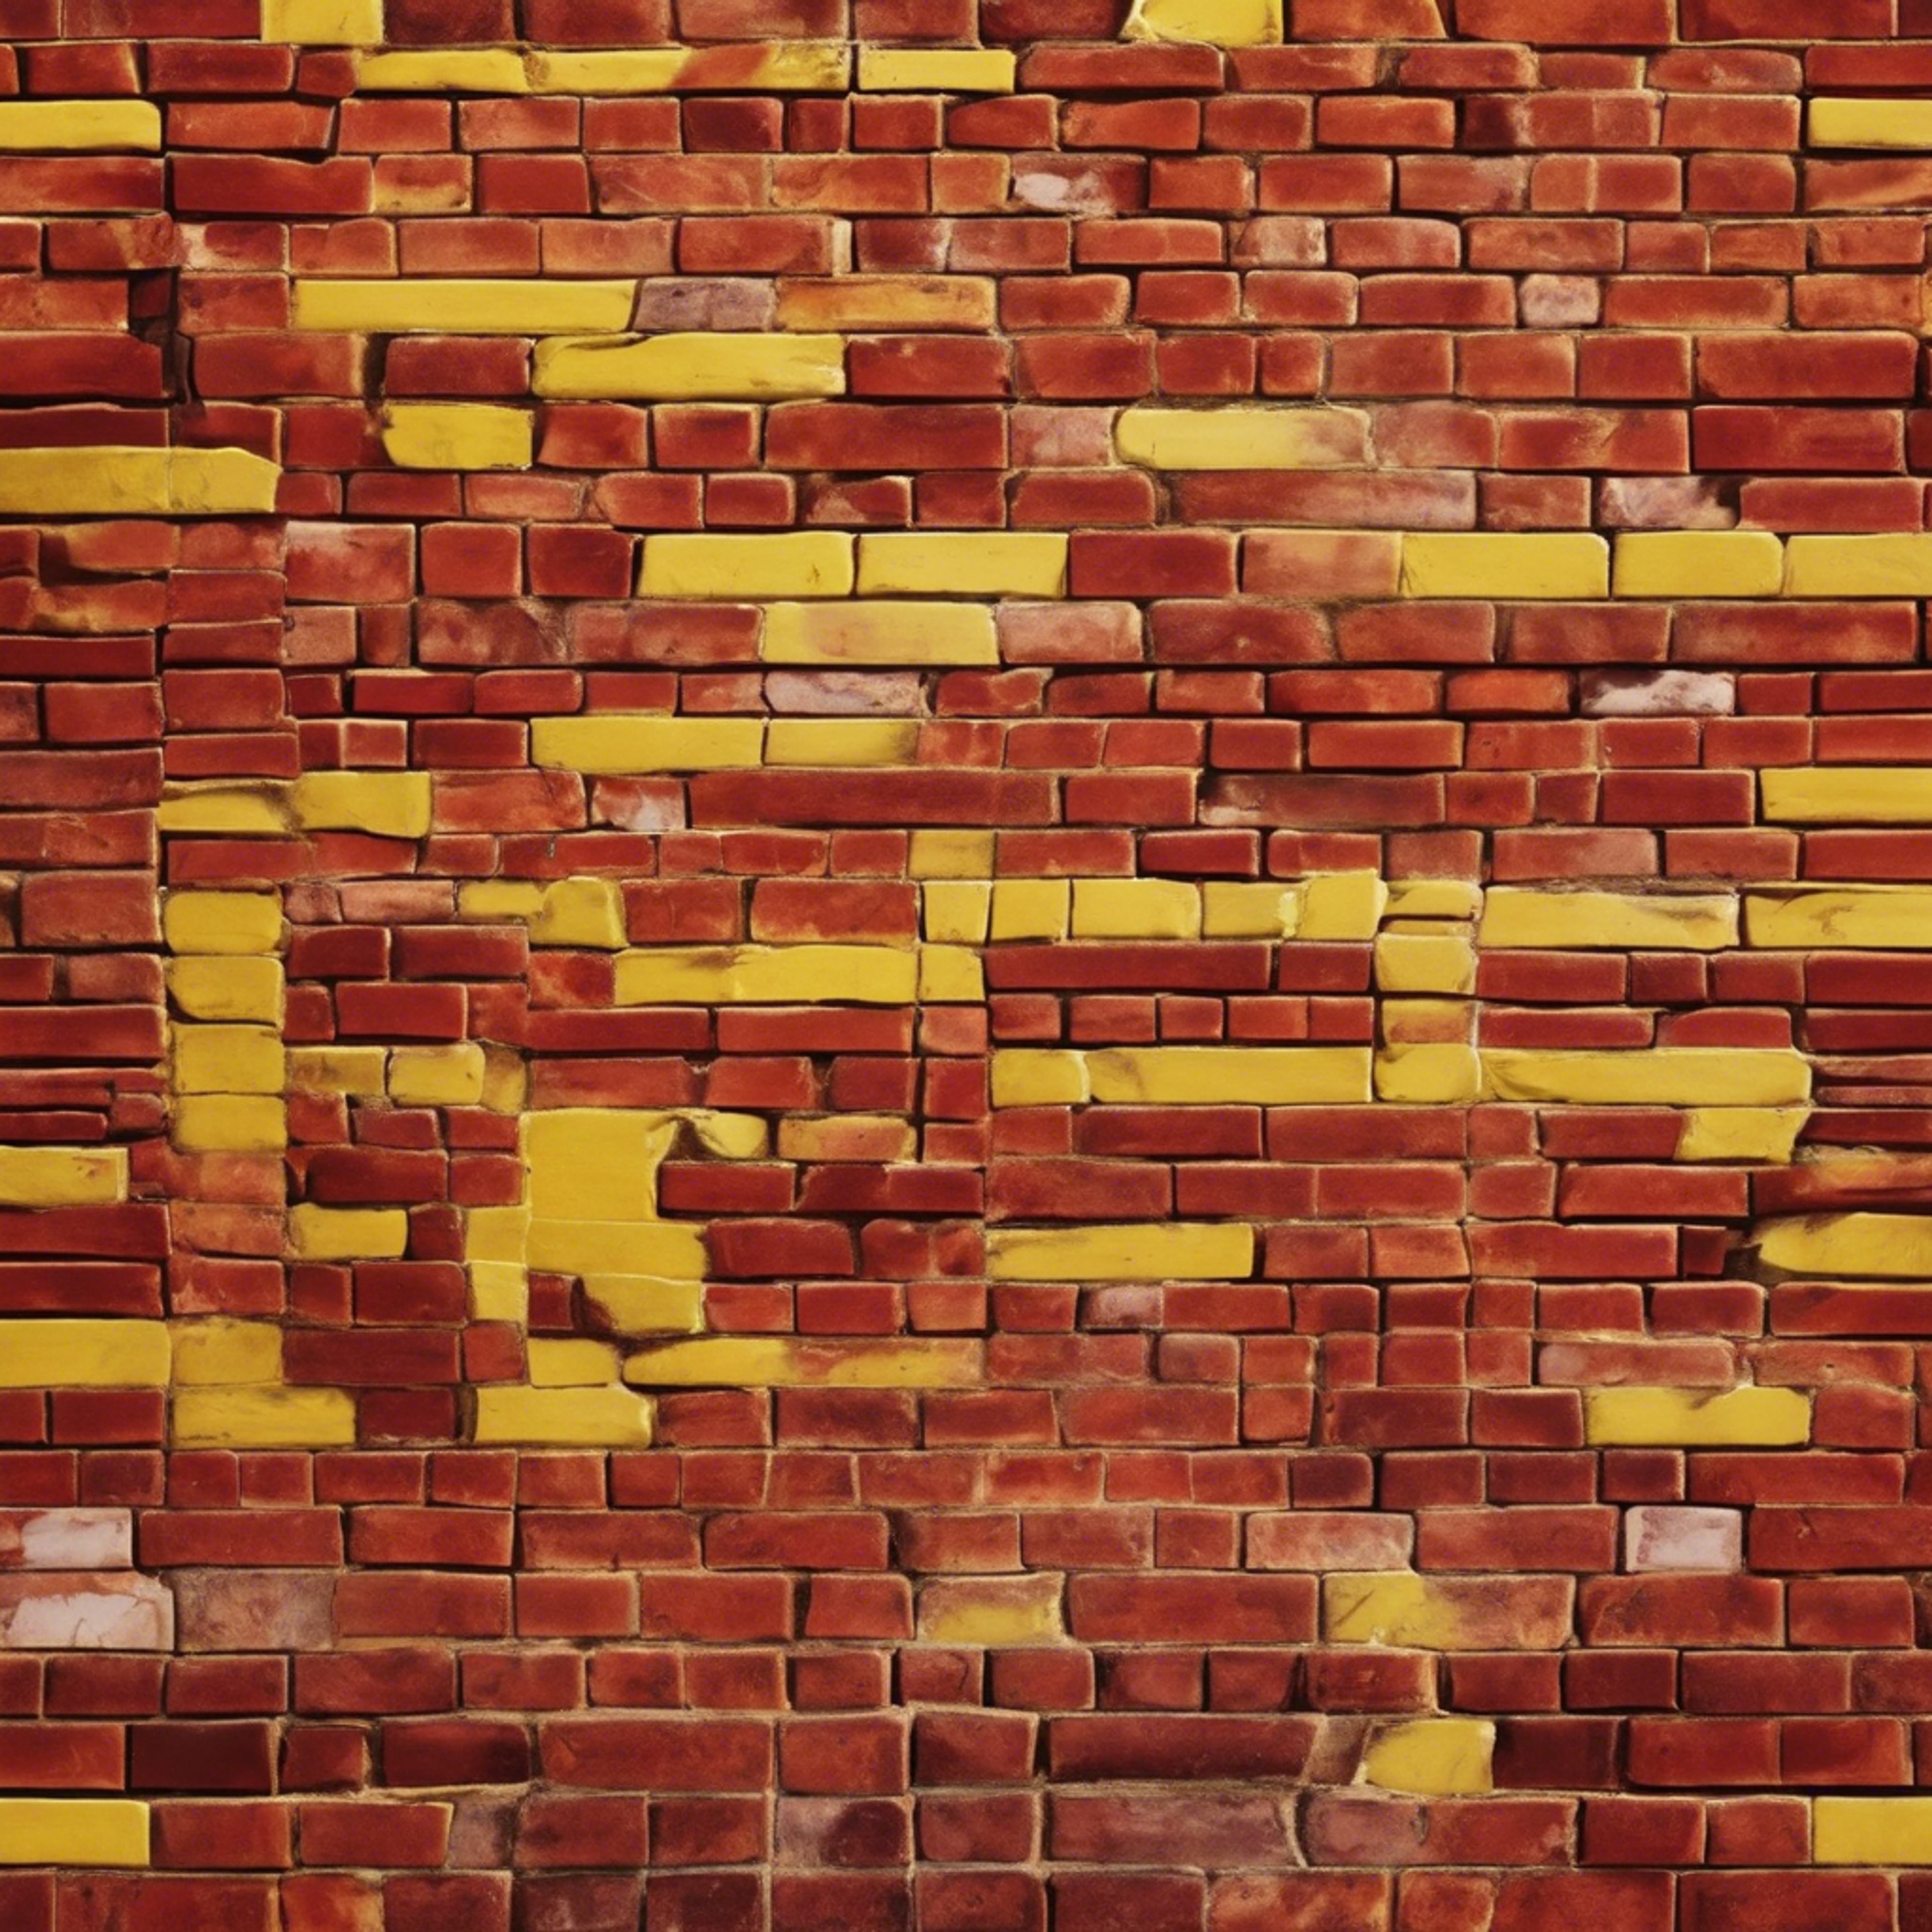 Red and yellow brick pattern seen through the illusion of a watery surface - the bricks appear slightly distorted yet colorful. Wallpaper[6ac5a5324f9a41fcbc3c]